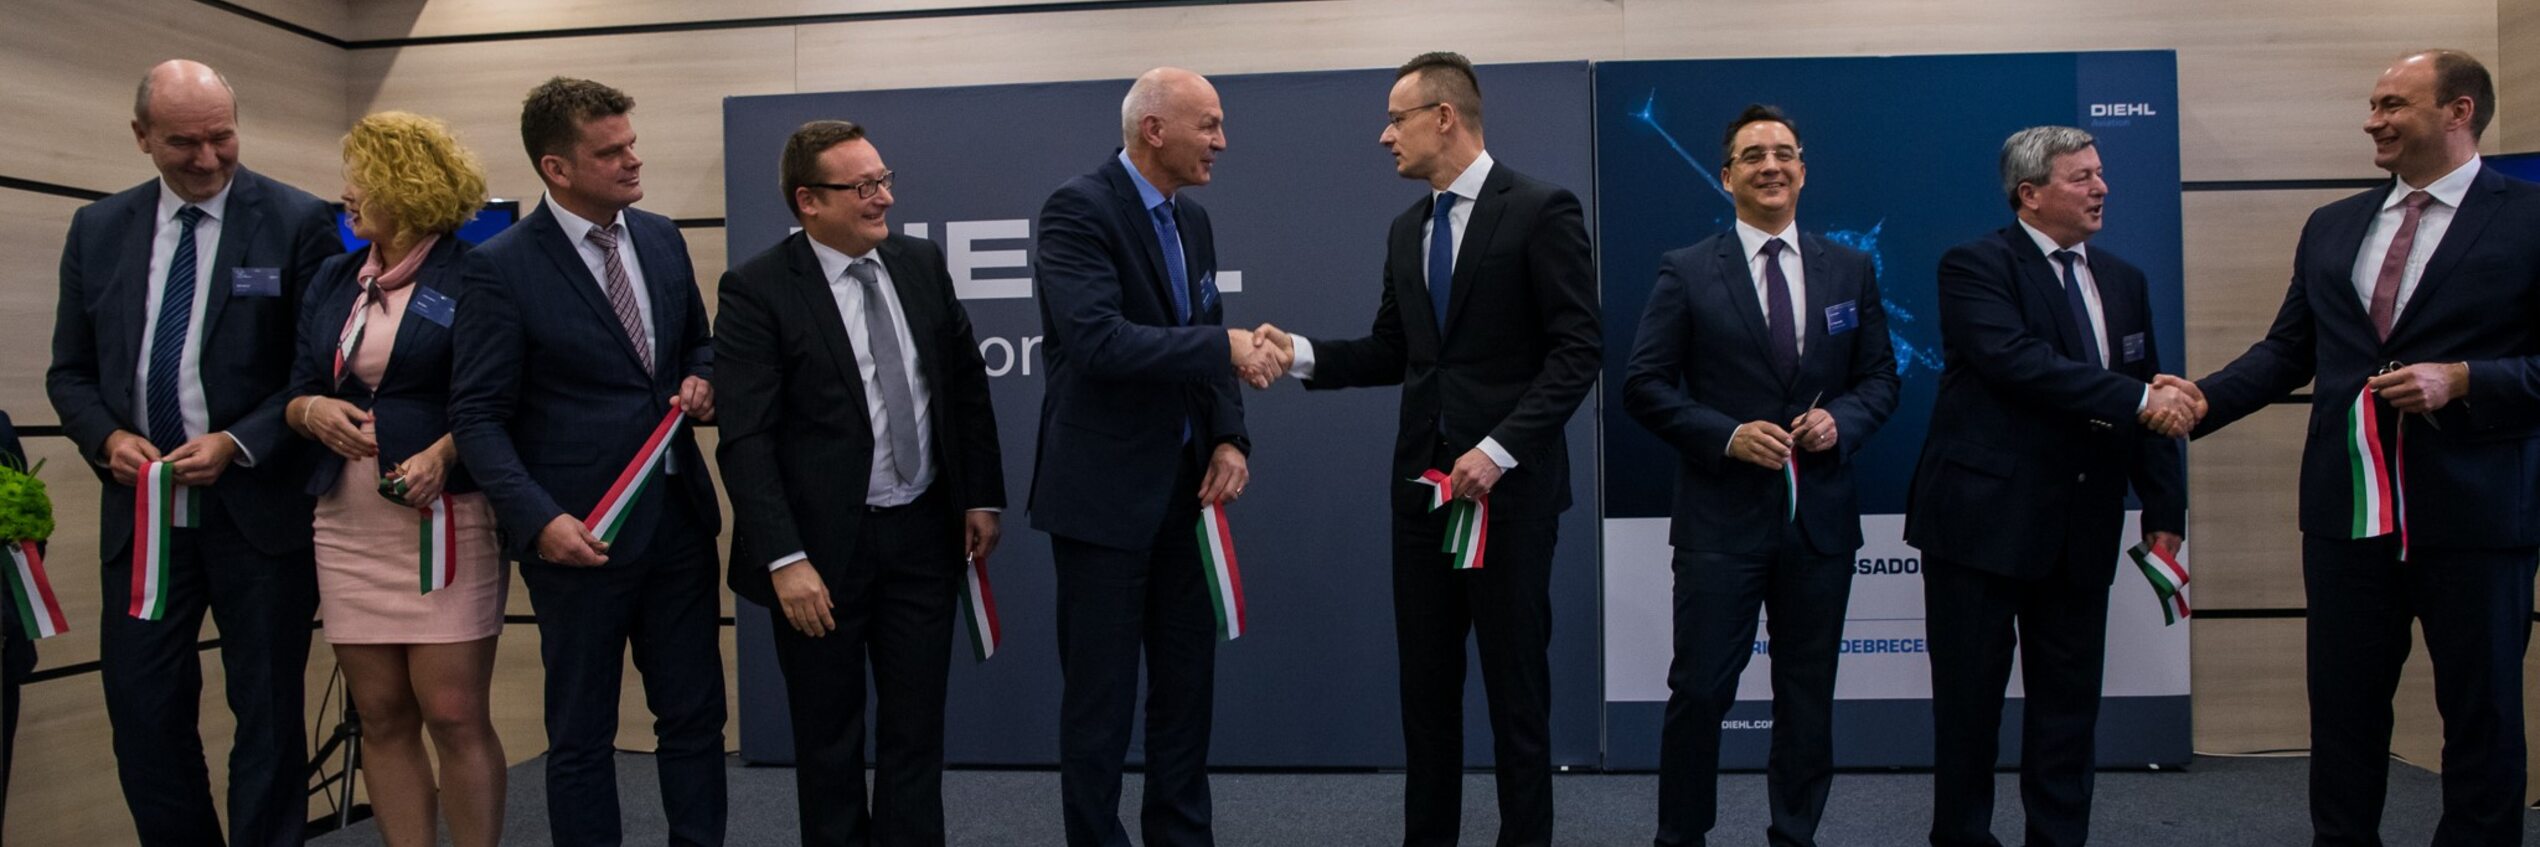 Diehl Aviation aquires new engineering and support center (ESC) in Debrecen, Hungary